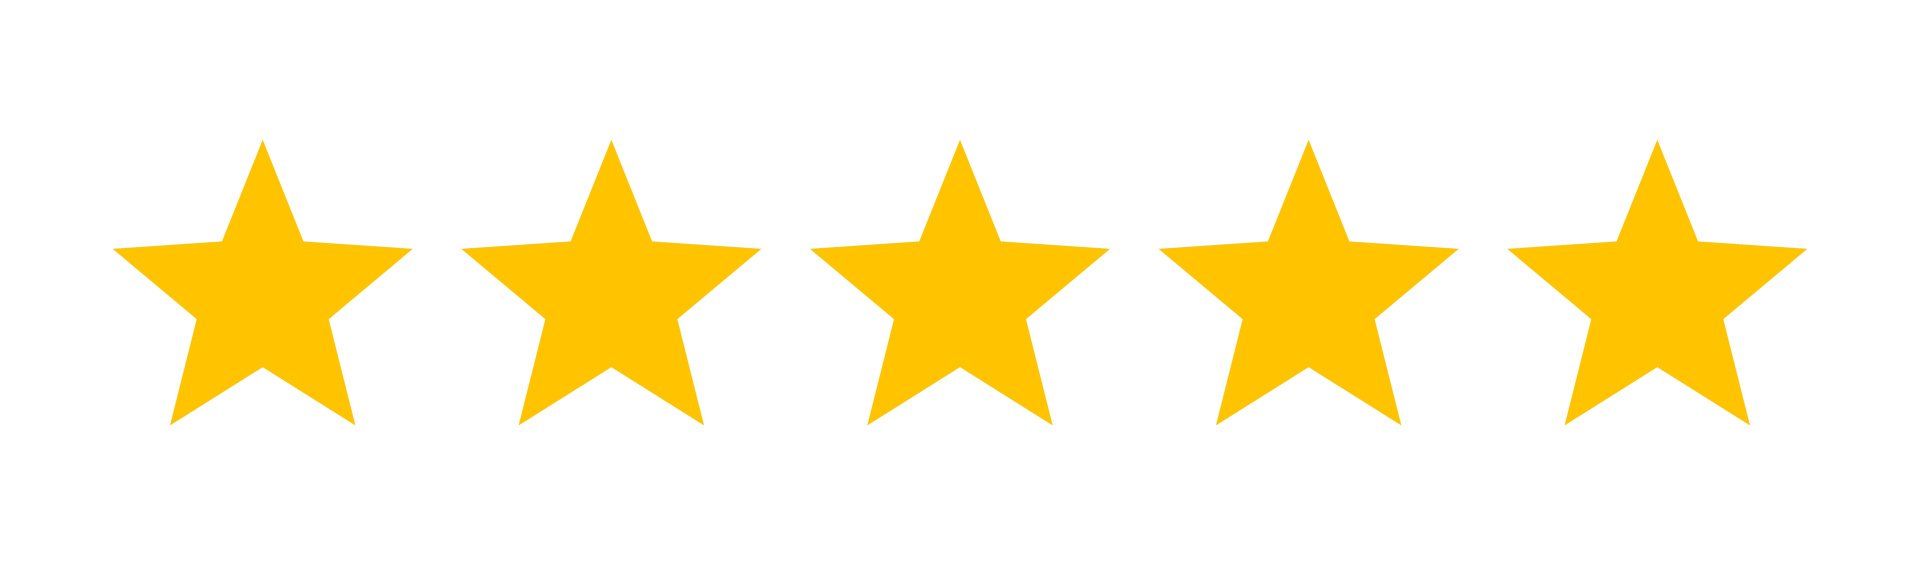 5 star rating from tenant